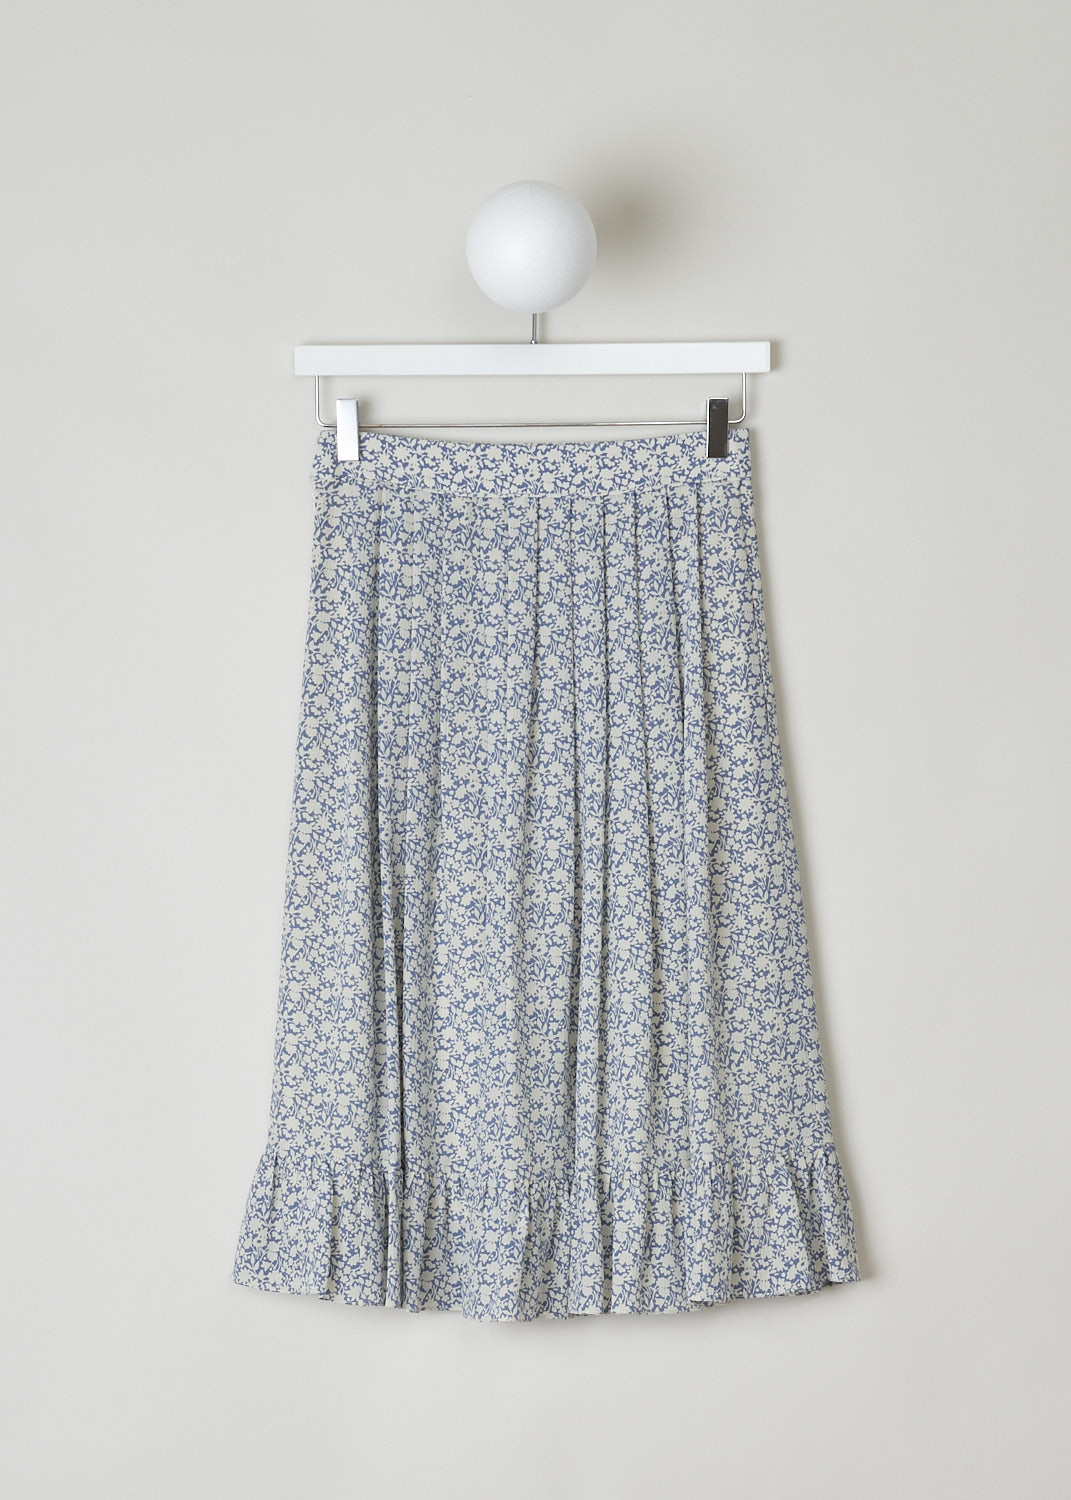 CELINE, BLUE AND WHITE FLORAL MIDI SKIRT, 757L_2J264_07BW, Blue, White, Print, Back, This blue and white floral pleated skirt has a concealed side zip, concealed slanted pockets and a flounce hemline. The skirt is midi length and is fully lined. 
